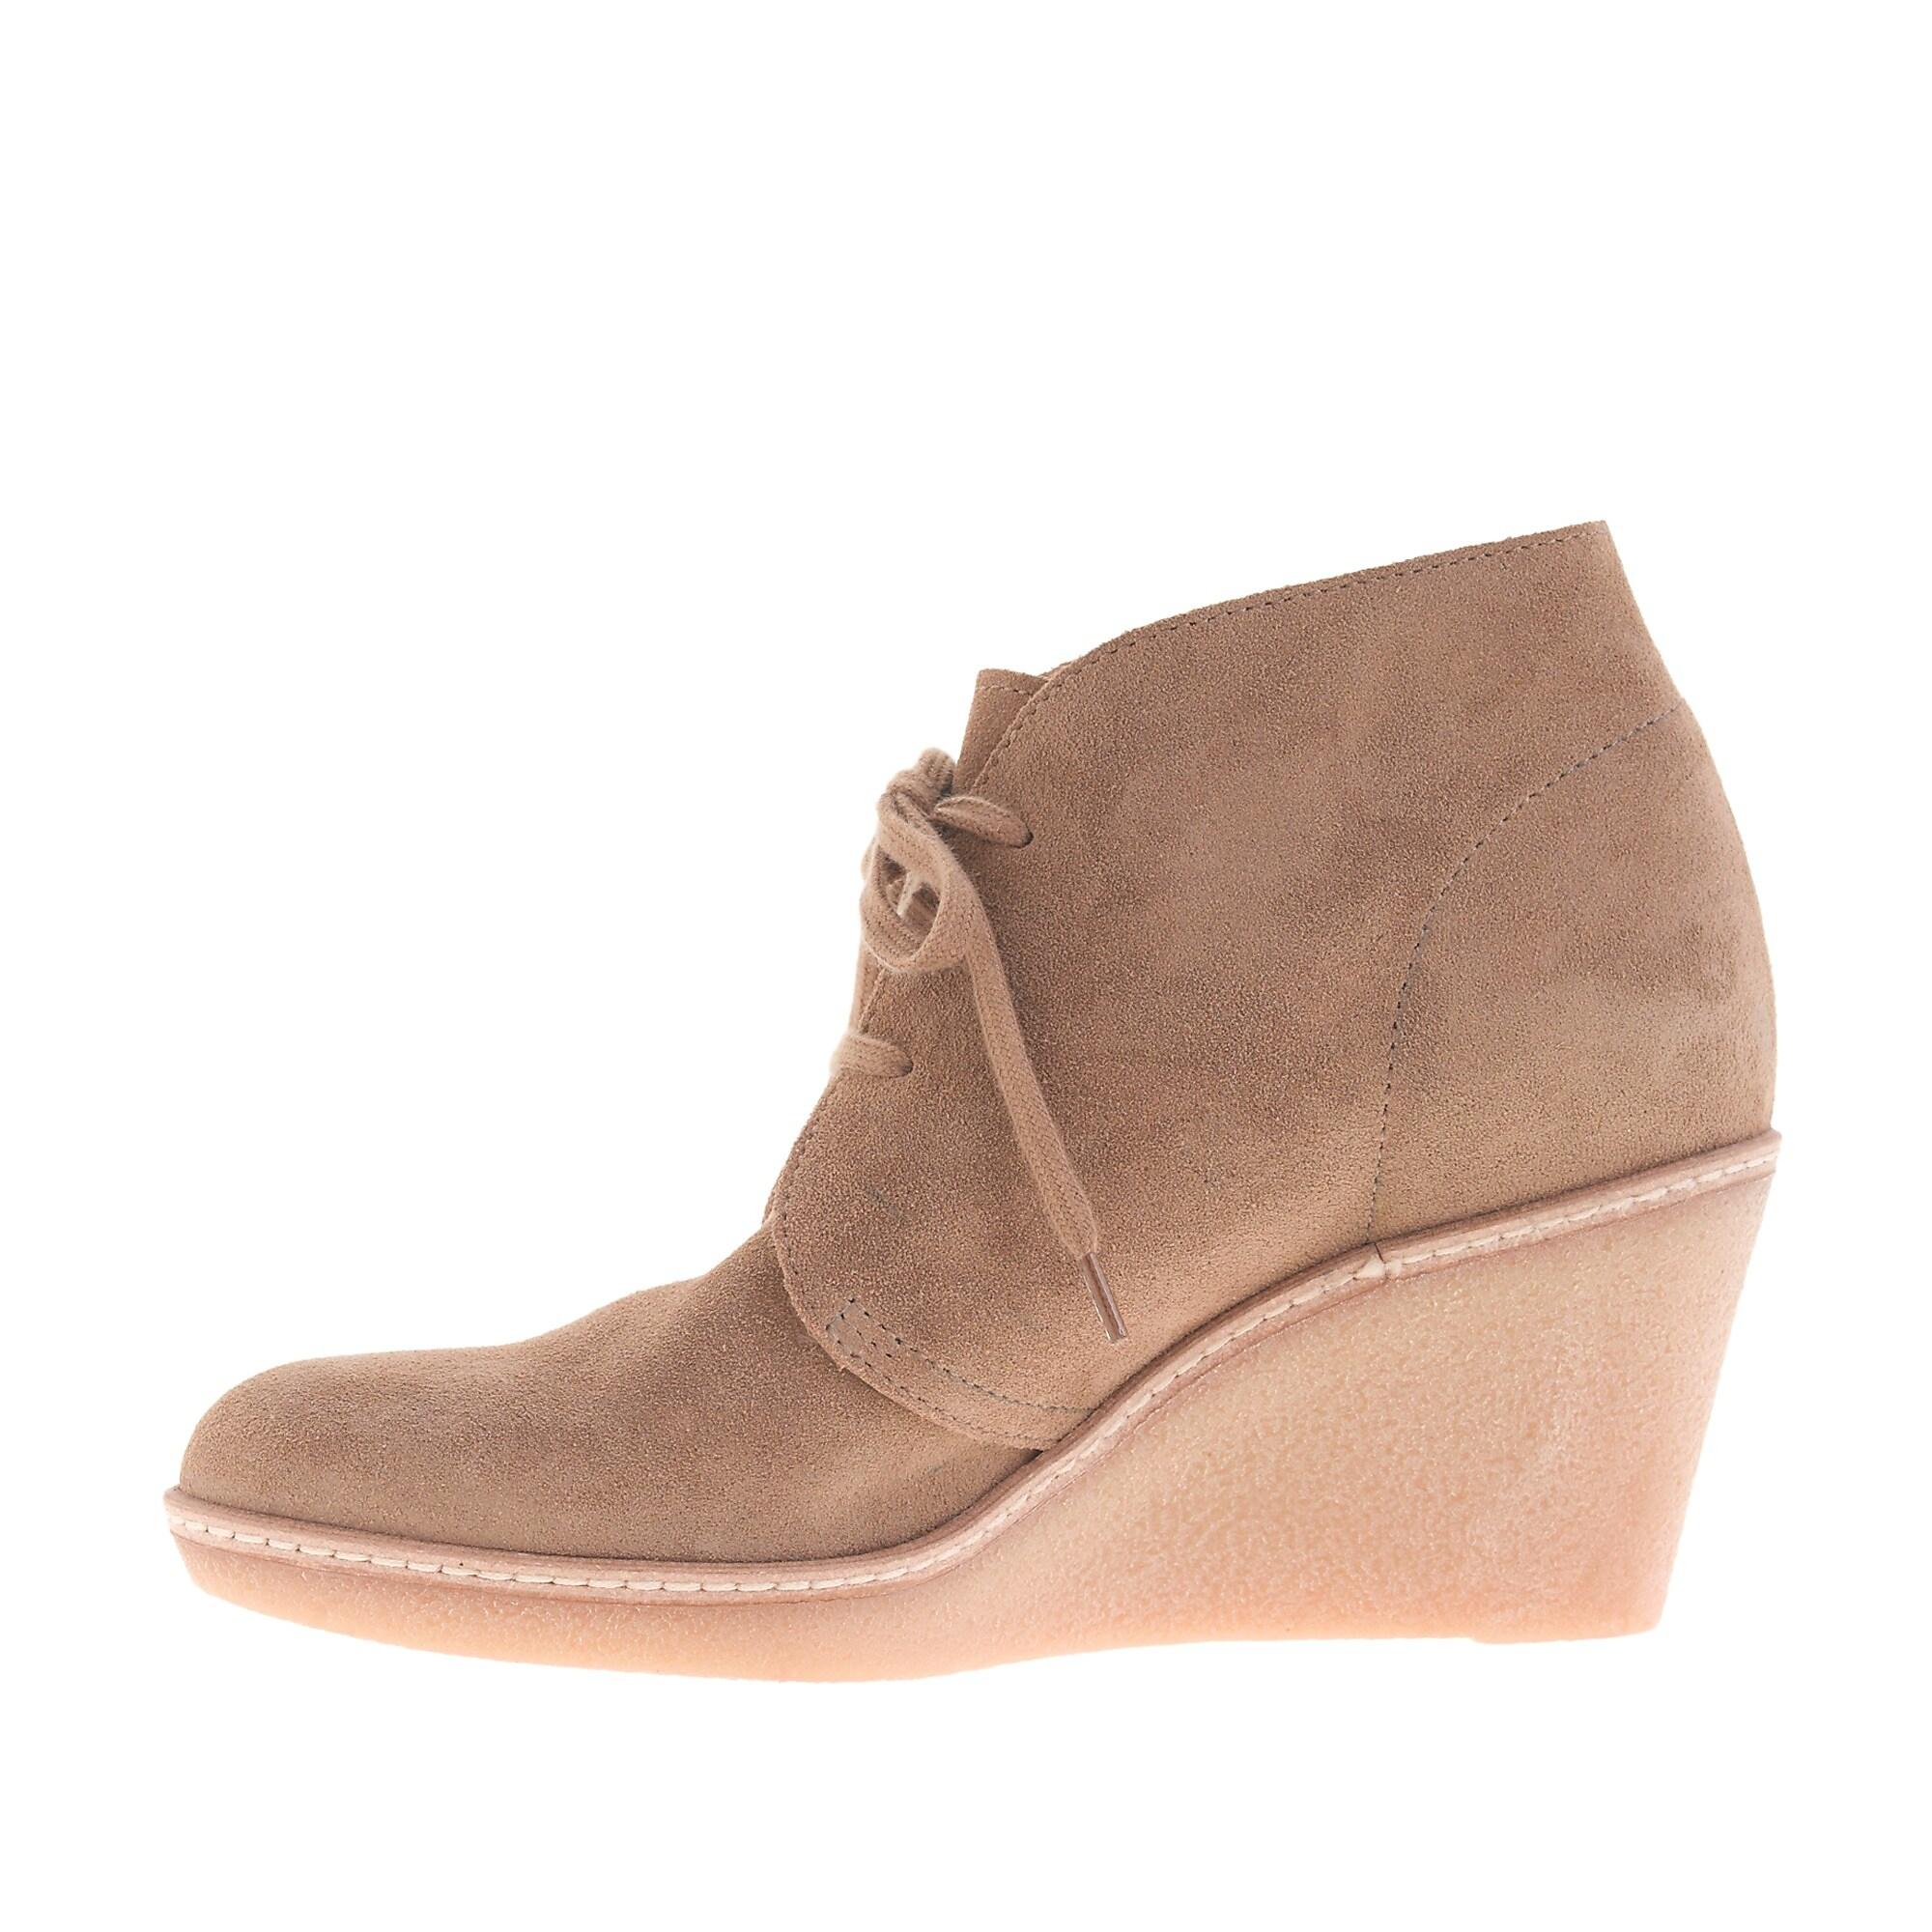 J.Crew Suede Macalister Wedge Boots in Brown - Lyst